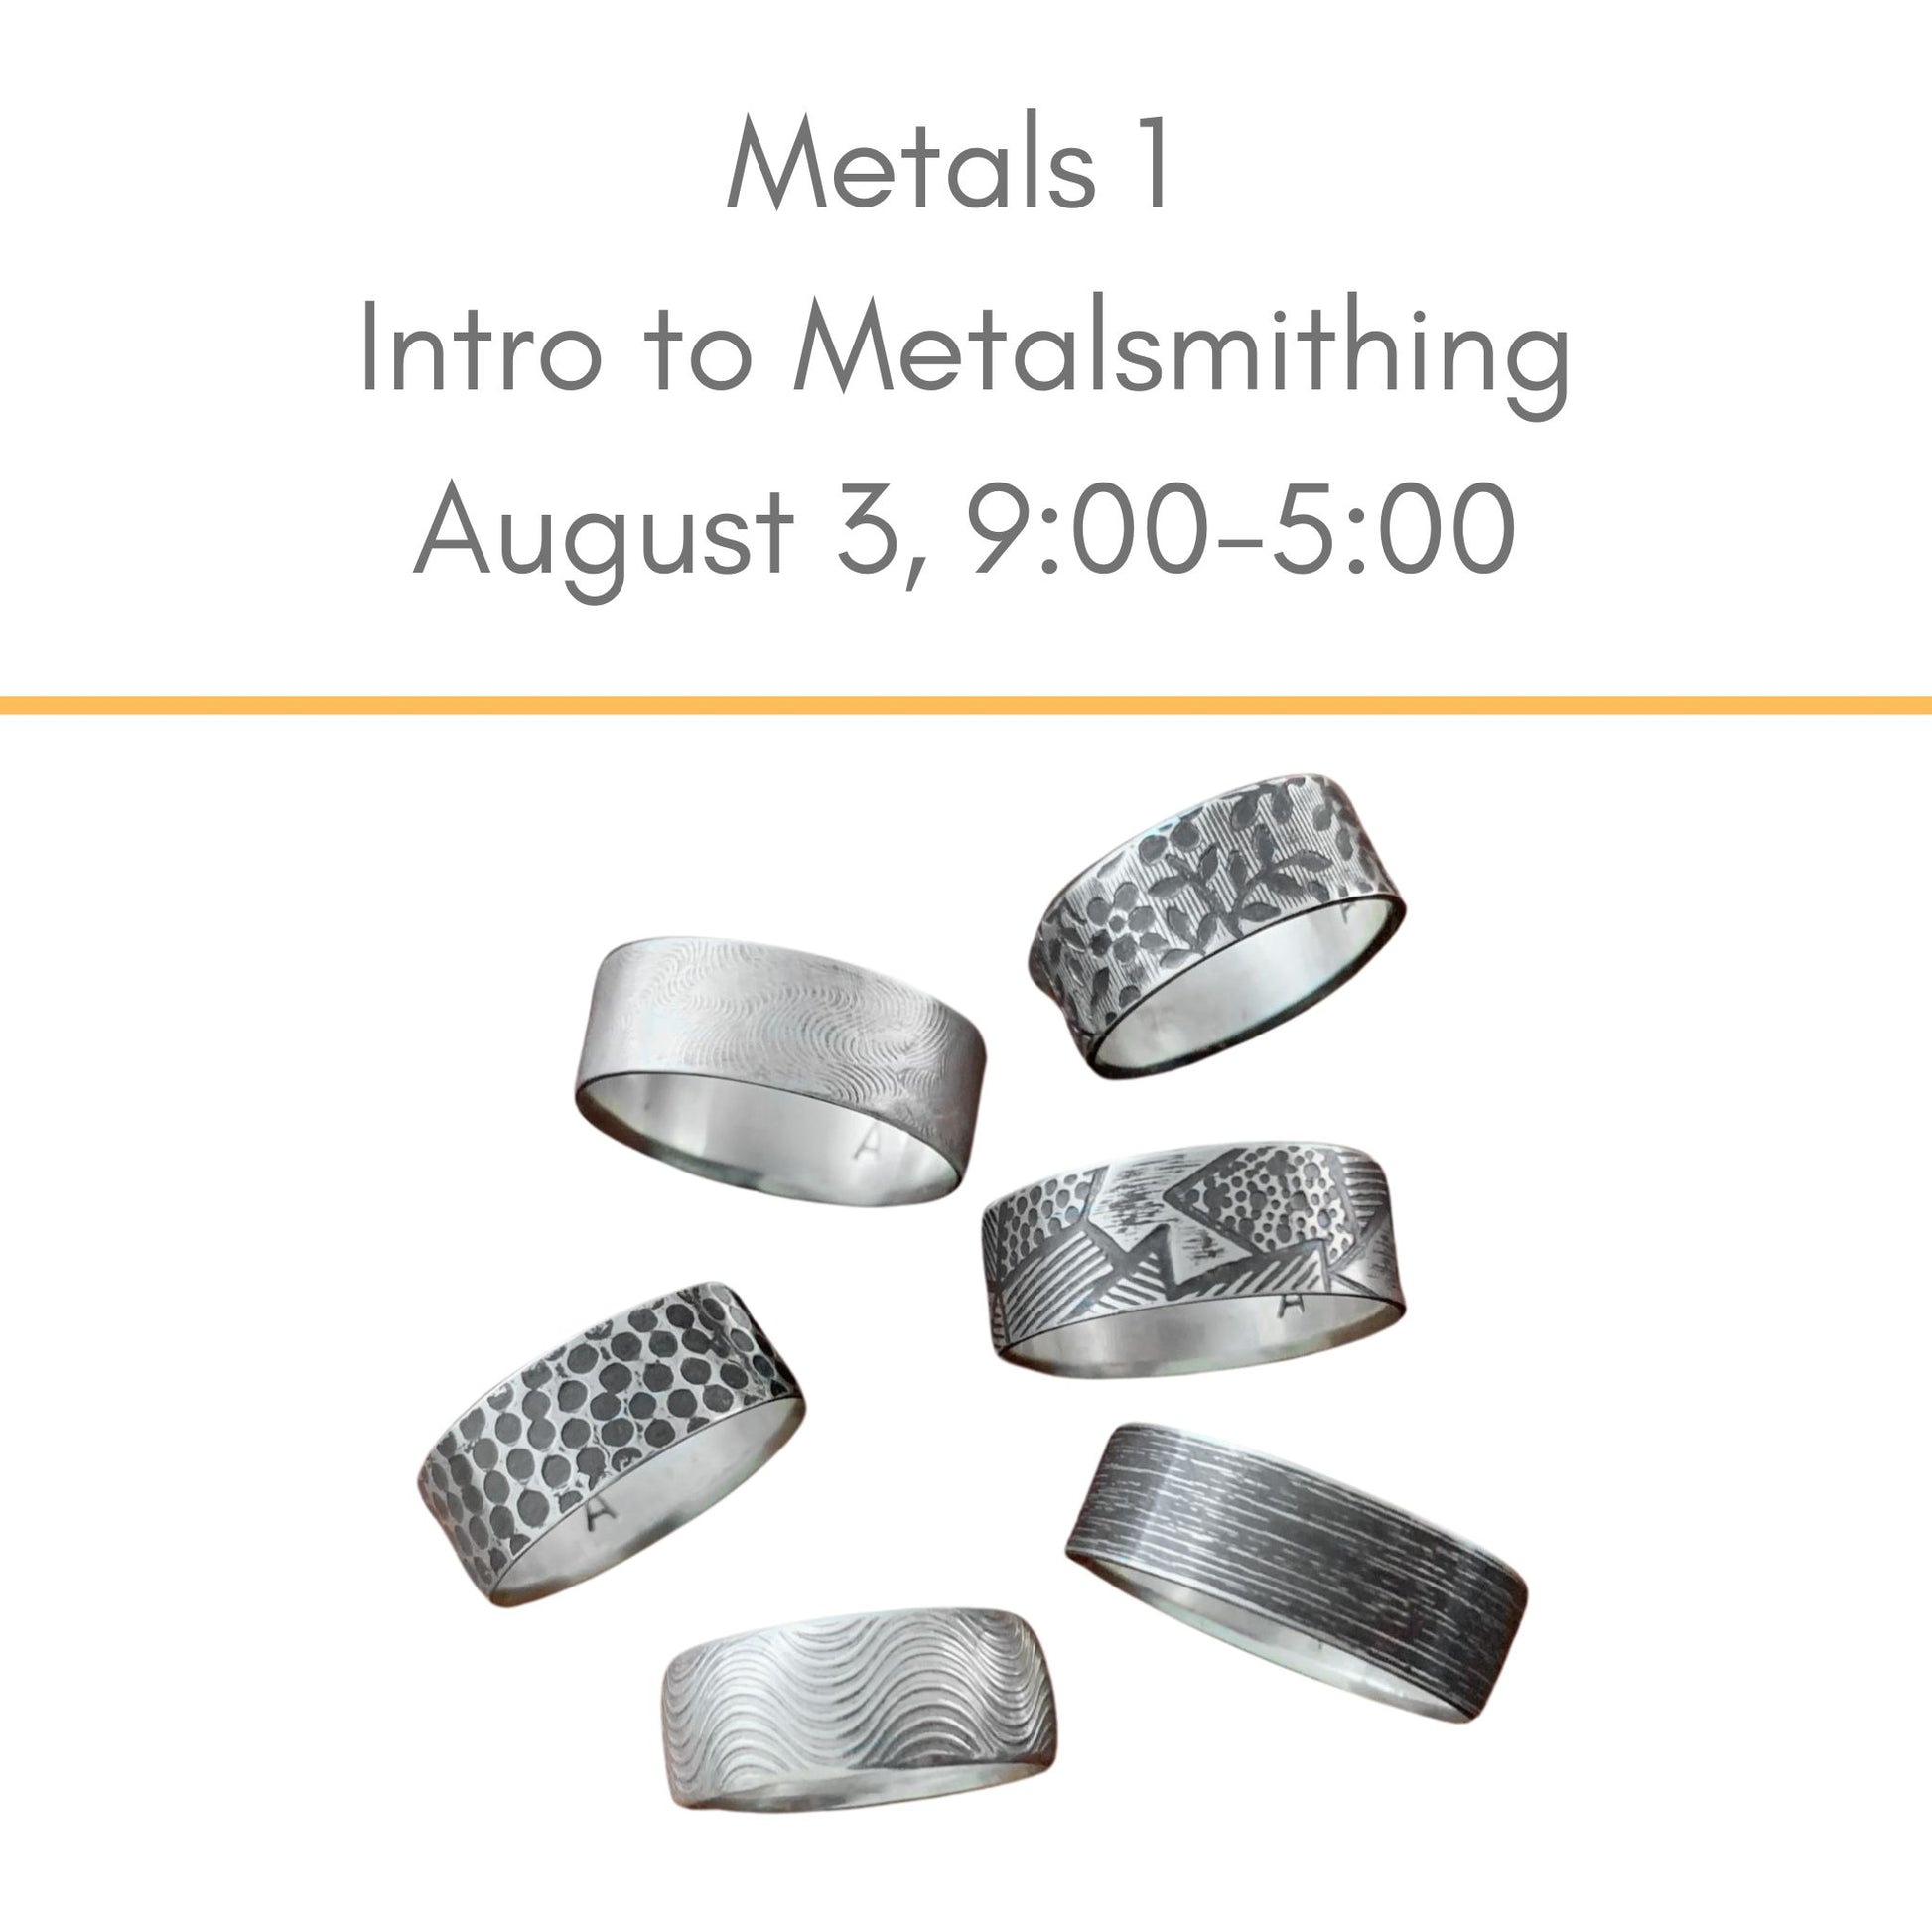 Intro to Metalsmithing Jewelry Class August 3